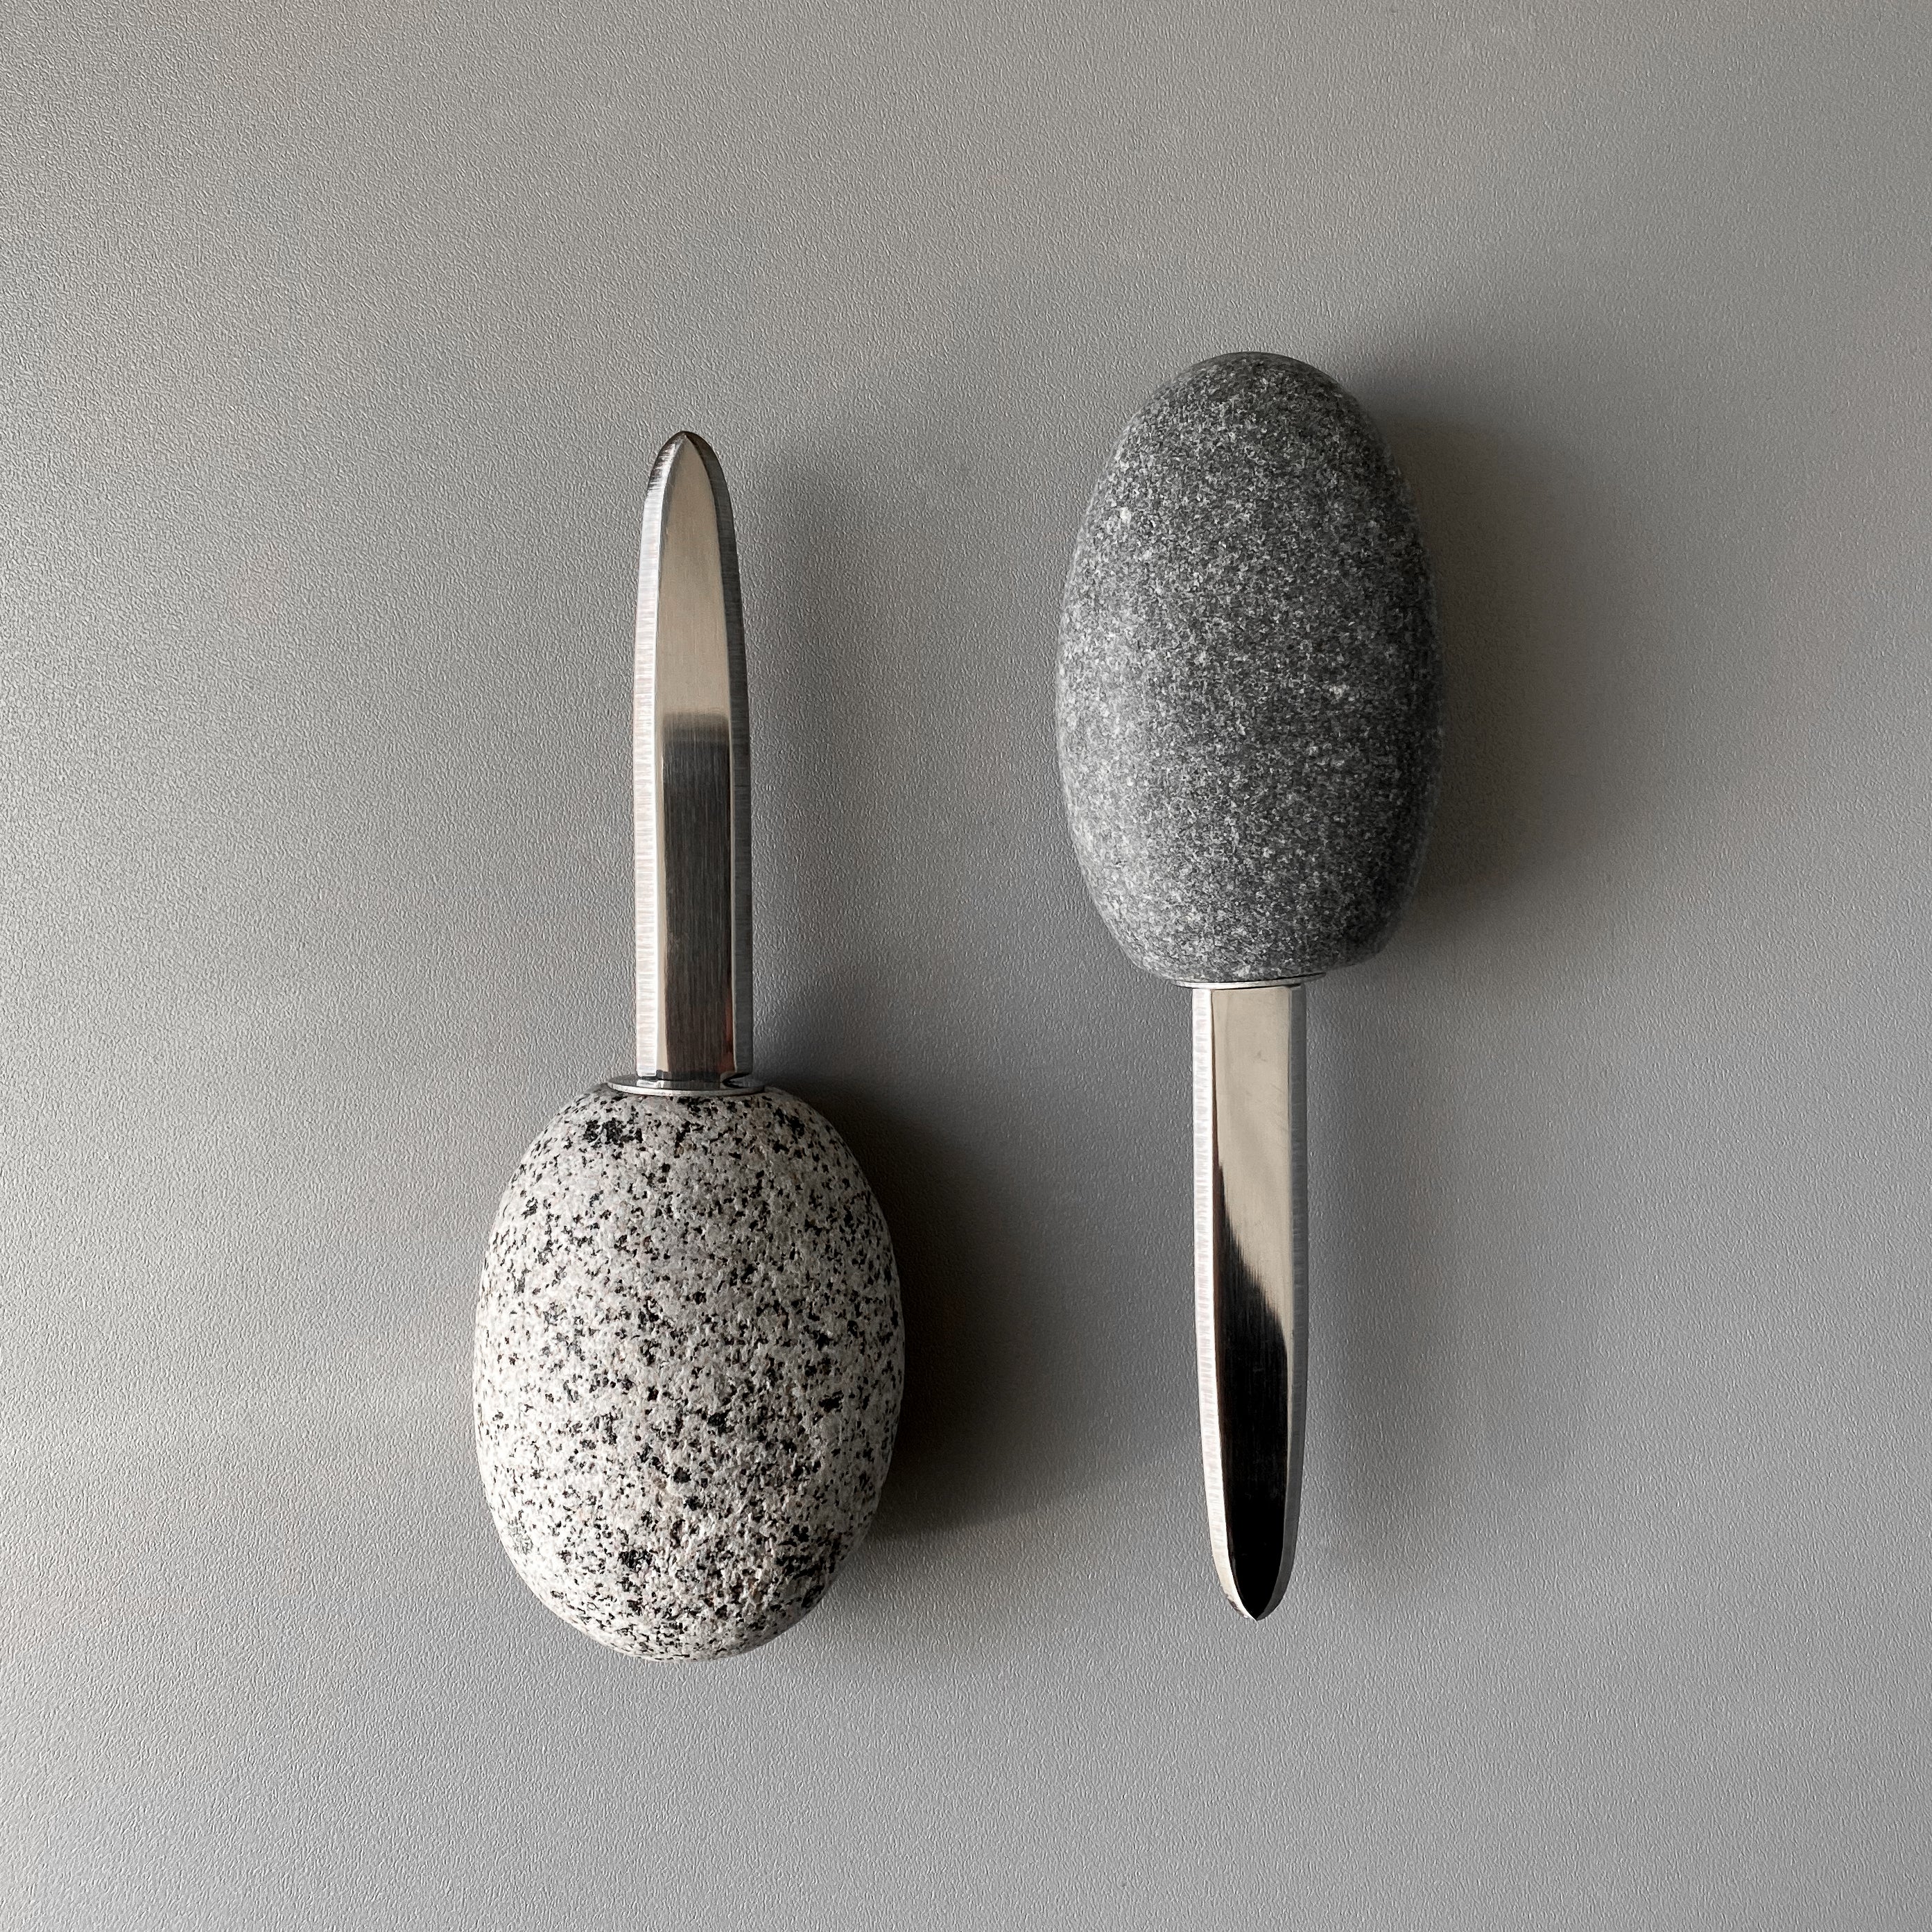 Stone Oyster Knife